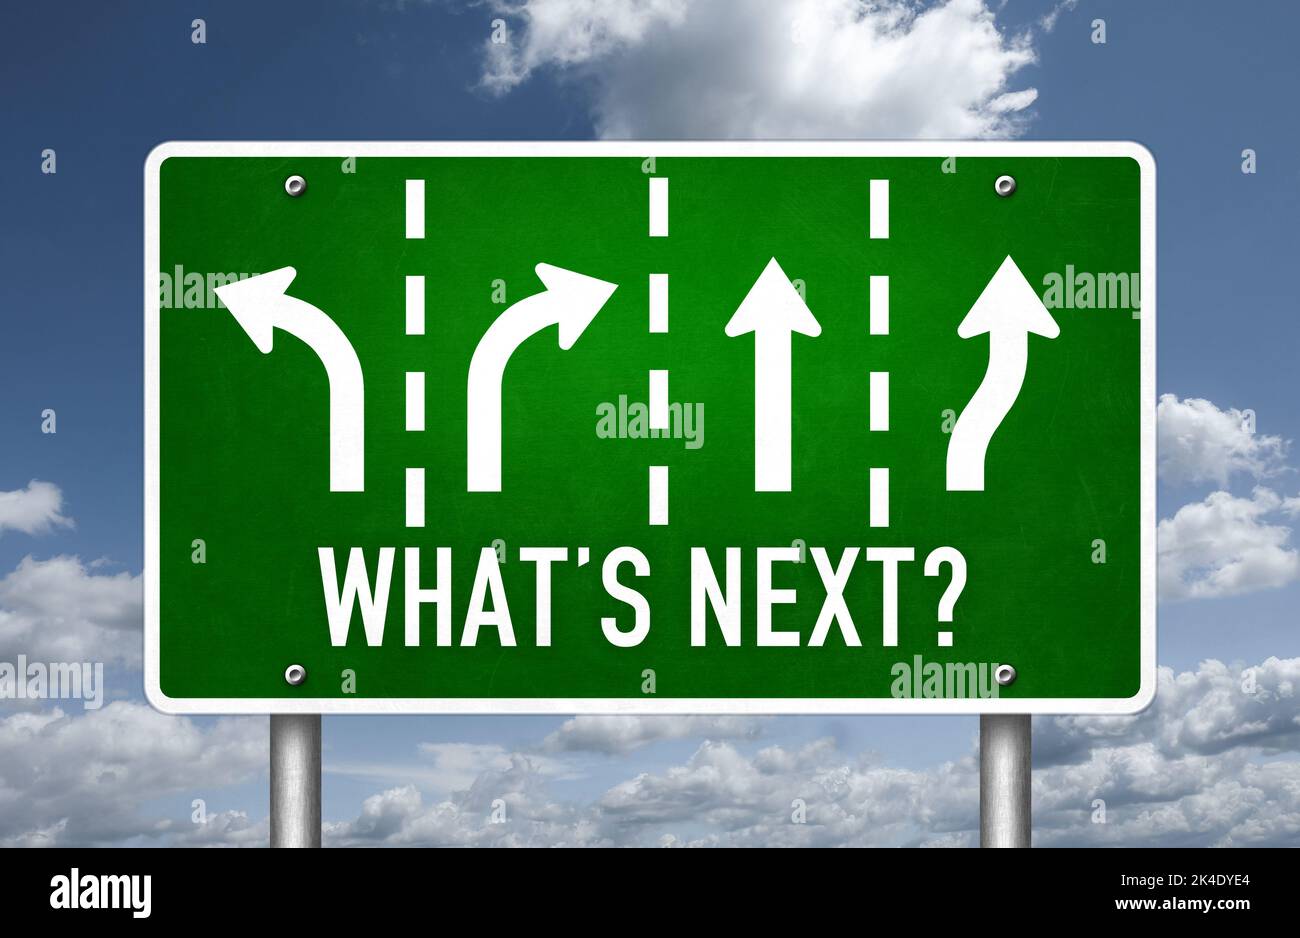 What' next - roadsign question Stock Photo